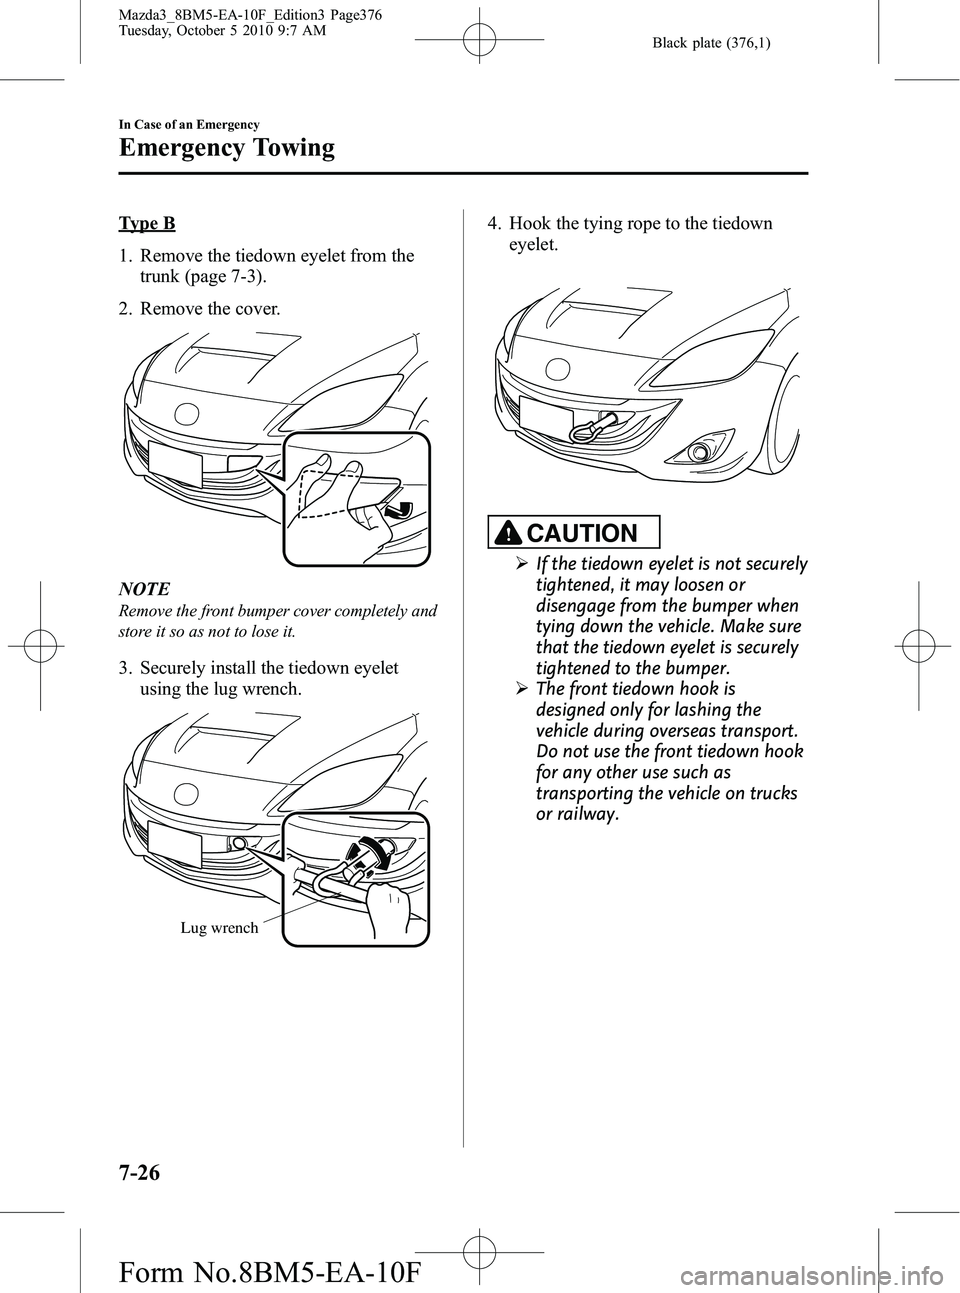 MAZDA MODEL 3 5-DOOR 2011  Owners Manual Black plate (376,1)
Type B
1. Remove the tiedown eyelet from thetrunk (page 7-3).
2. Remove the cover.
NOTE
Remove the front bumper cover completely and
store it so as not to lose it.
3. Securely inst